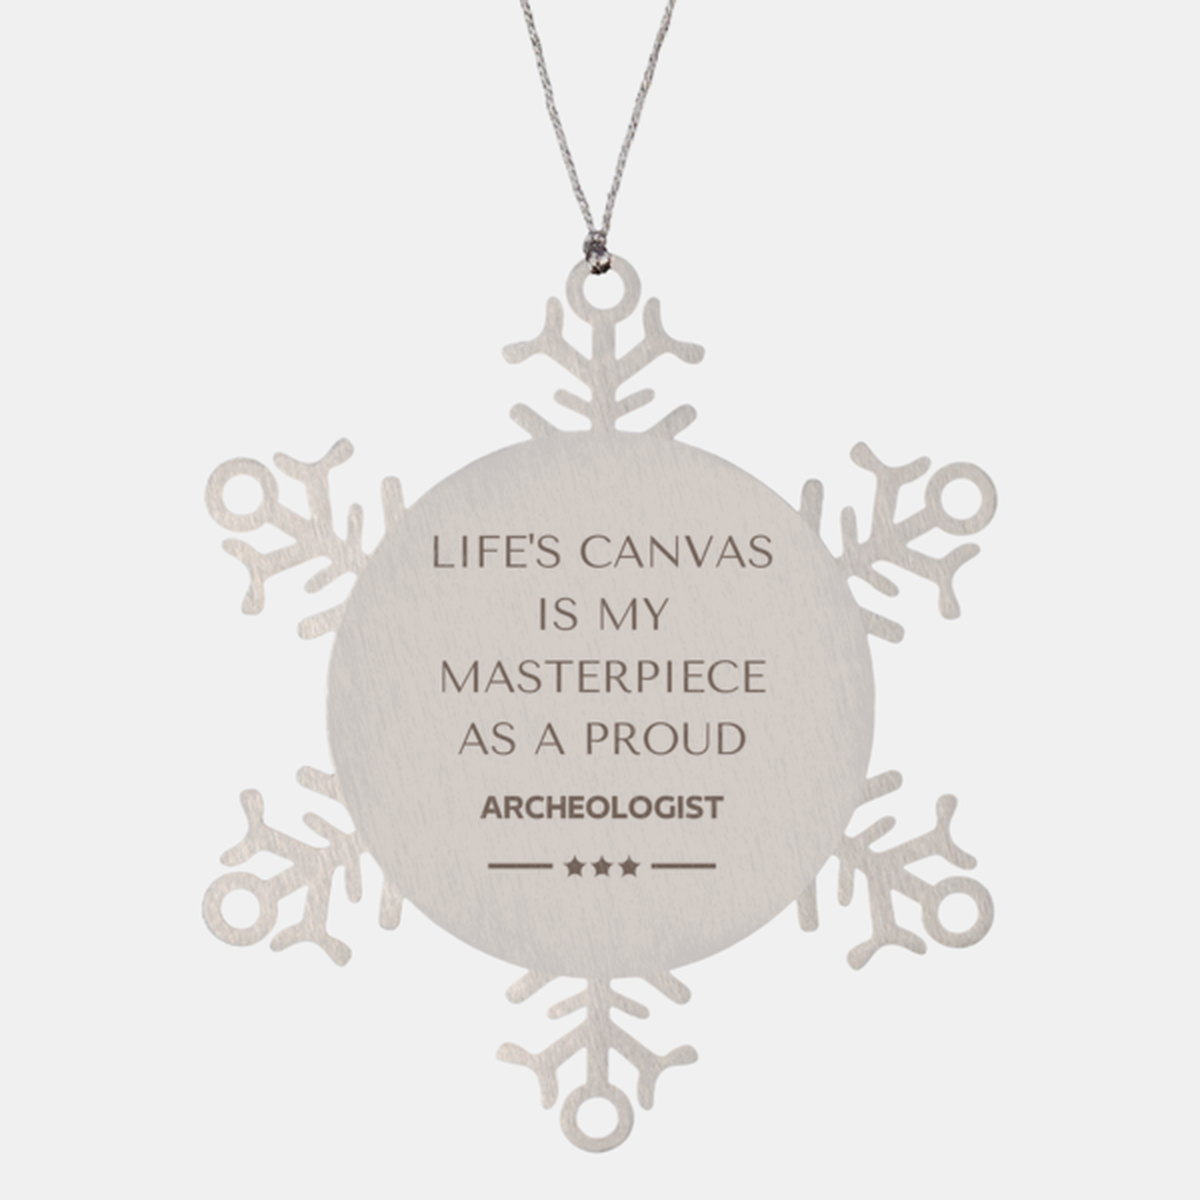 Proud Archeologist Gifts, Life's canvas is my masterpiece, Epic Birthday Christmas Unique Snowflake Ornament For Archeologist, Coworkers, Men, Women, Friends